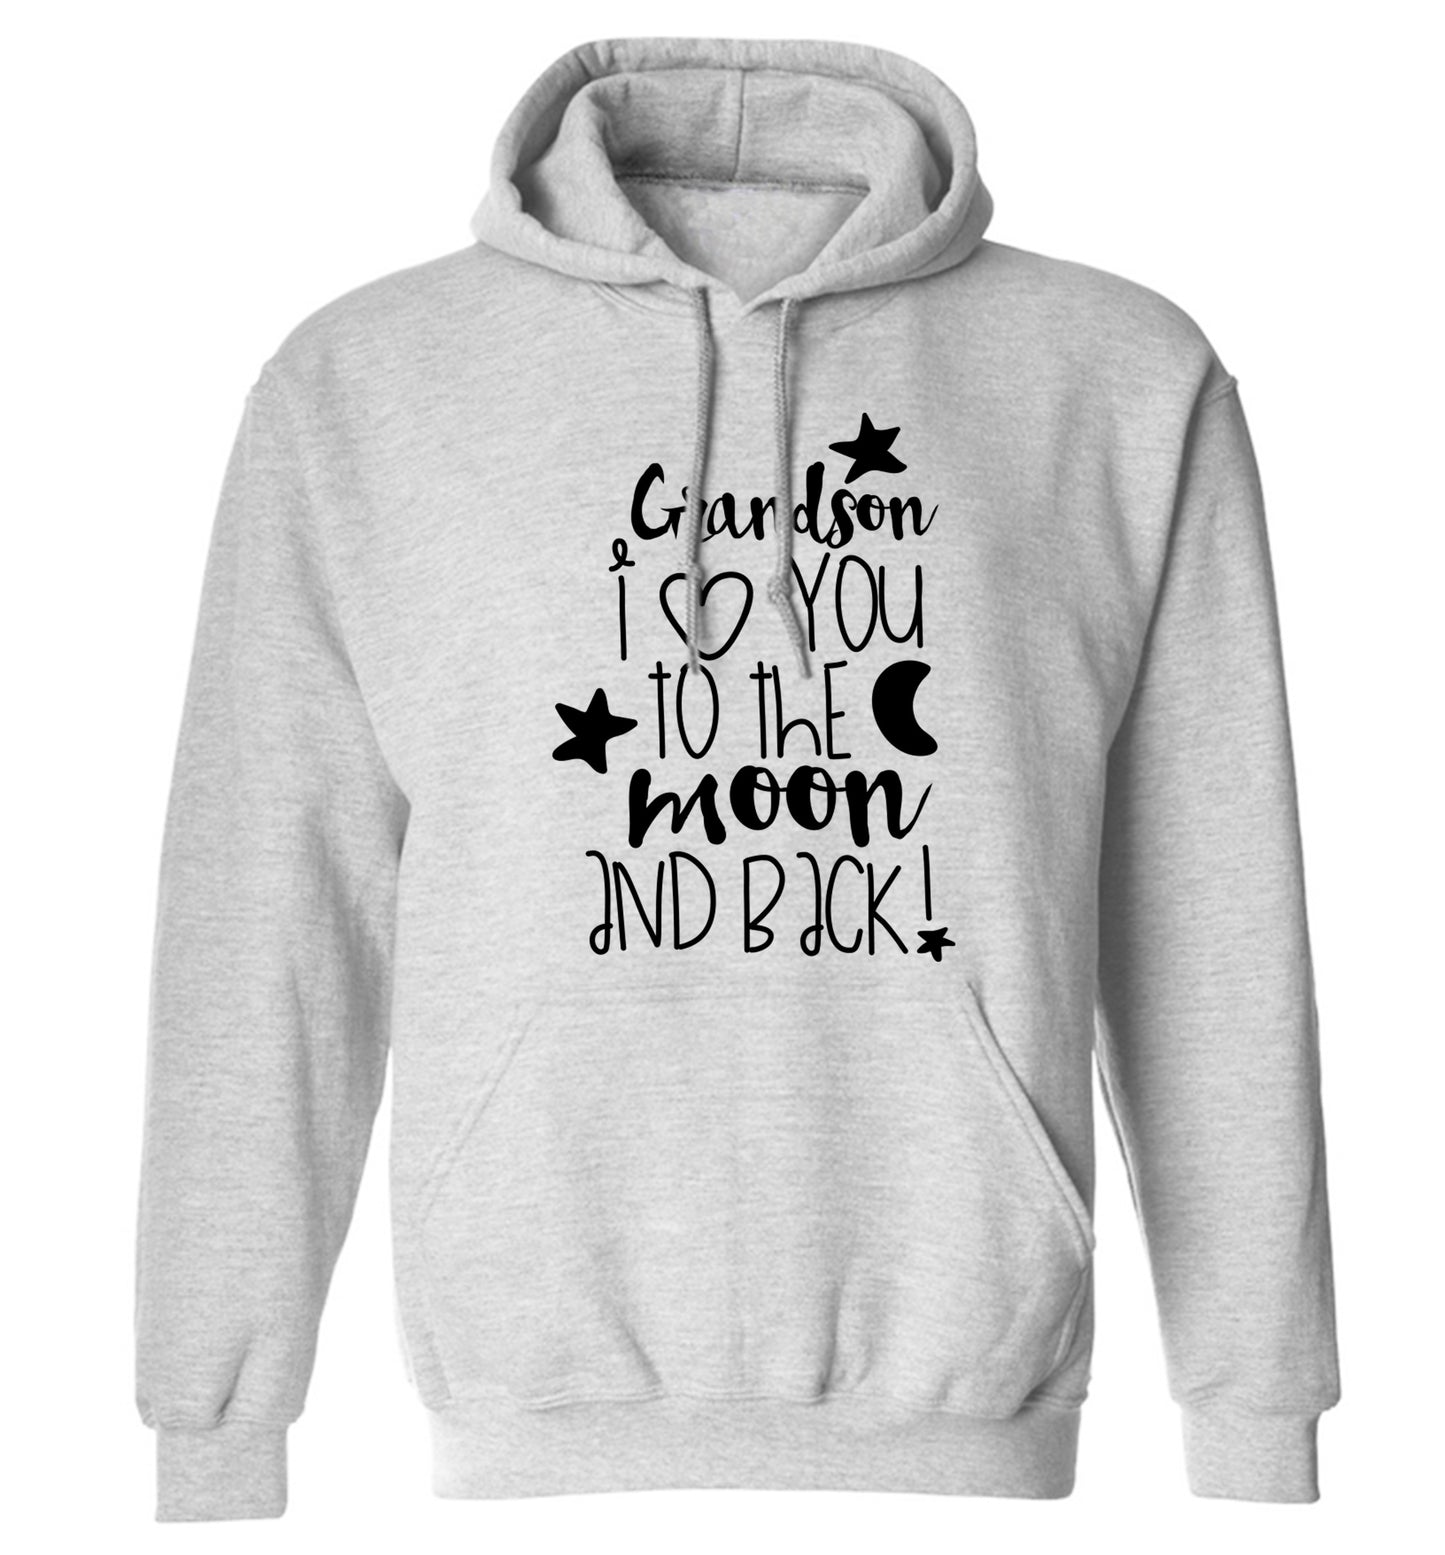 Grandson I love you to the moon and back adults unisex grey hoodie 2XL